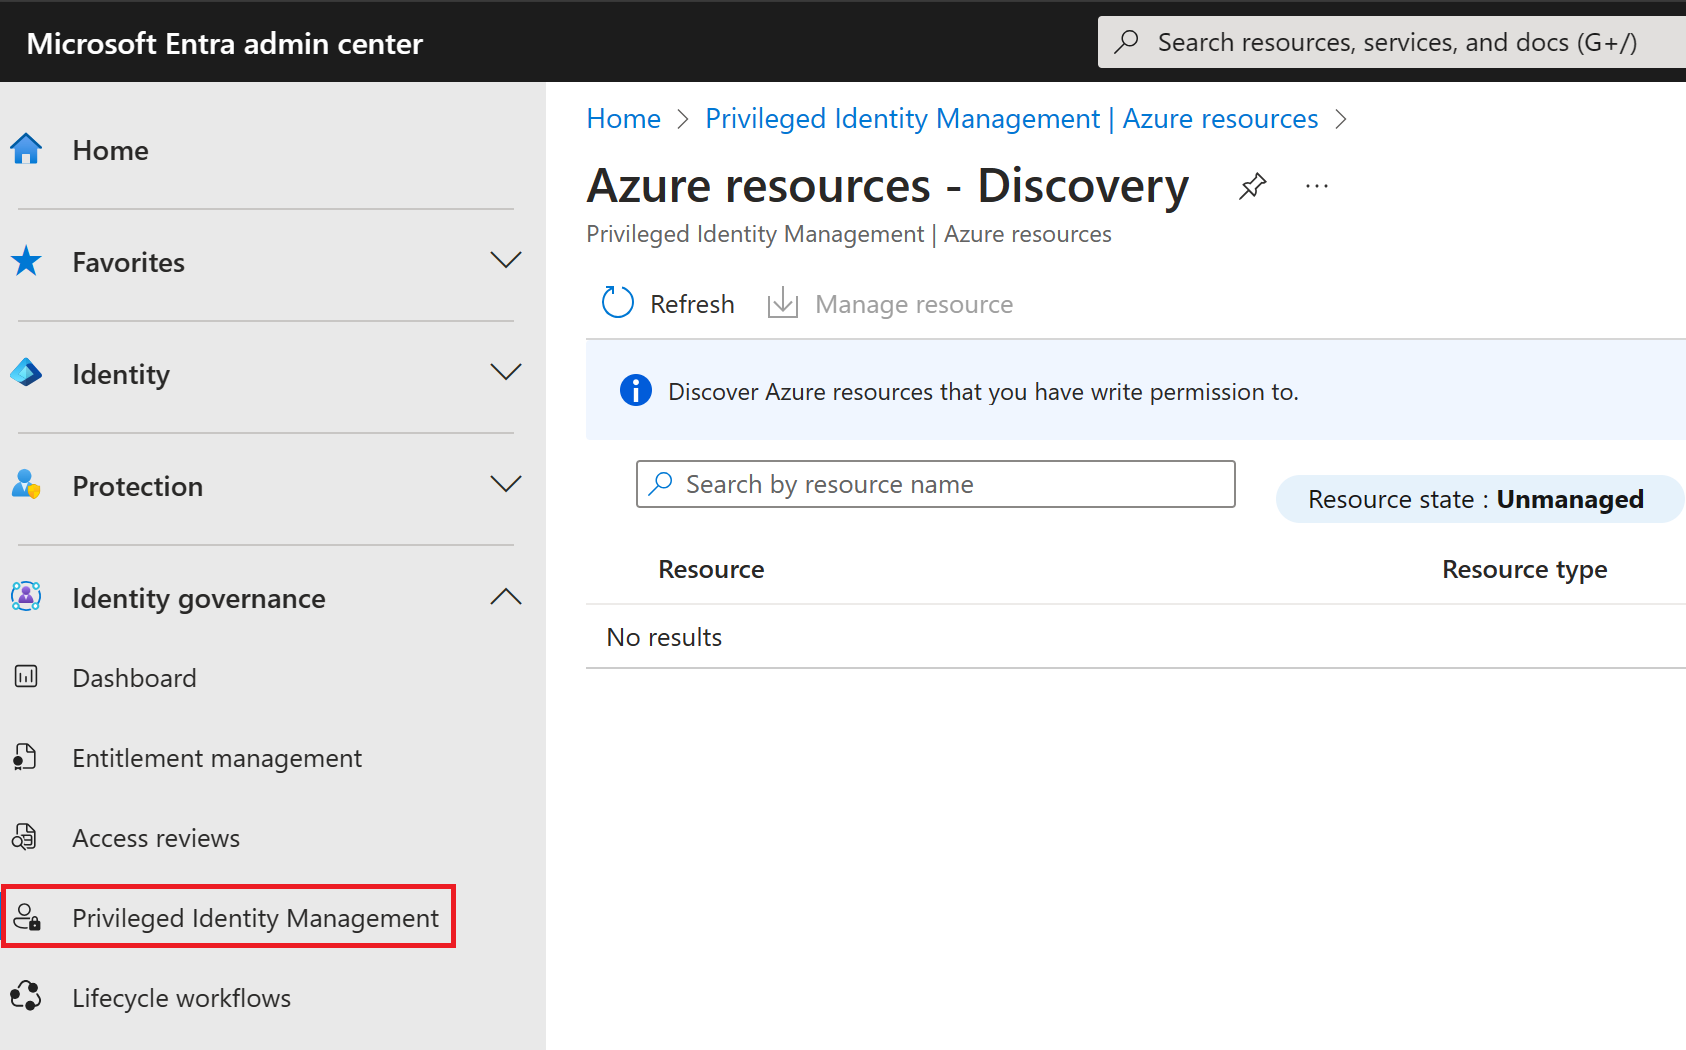 Screenshot of the Azure resources page of the Privileged Identity Management.